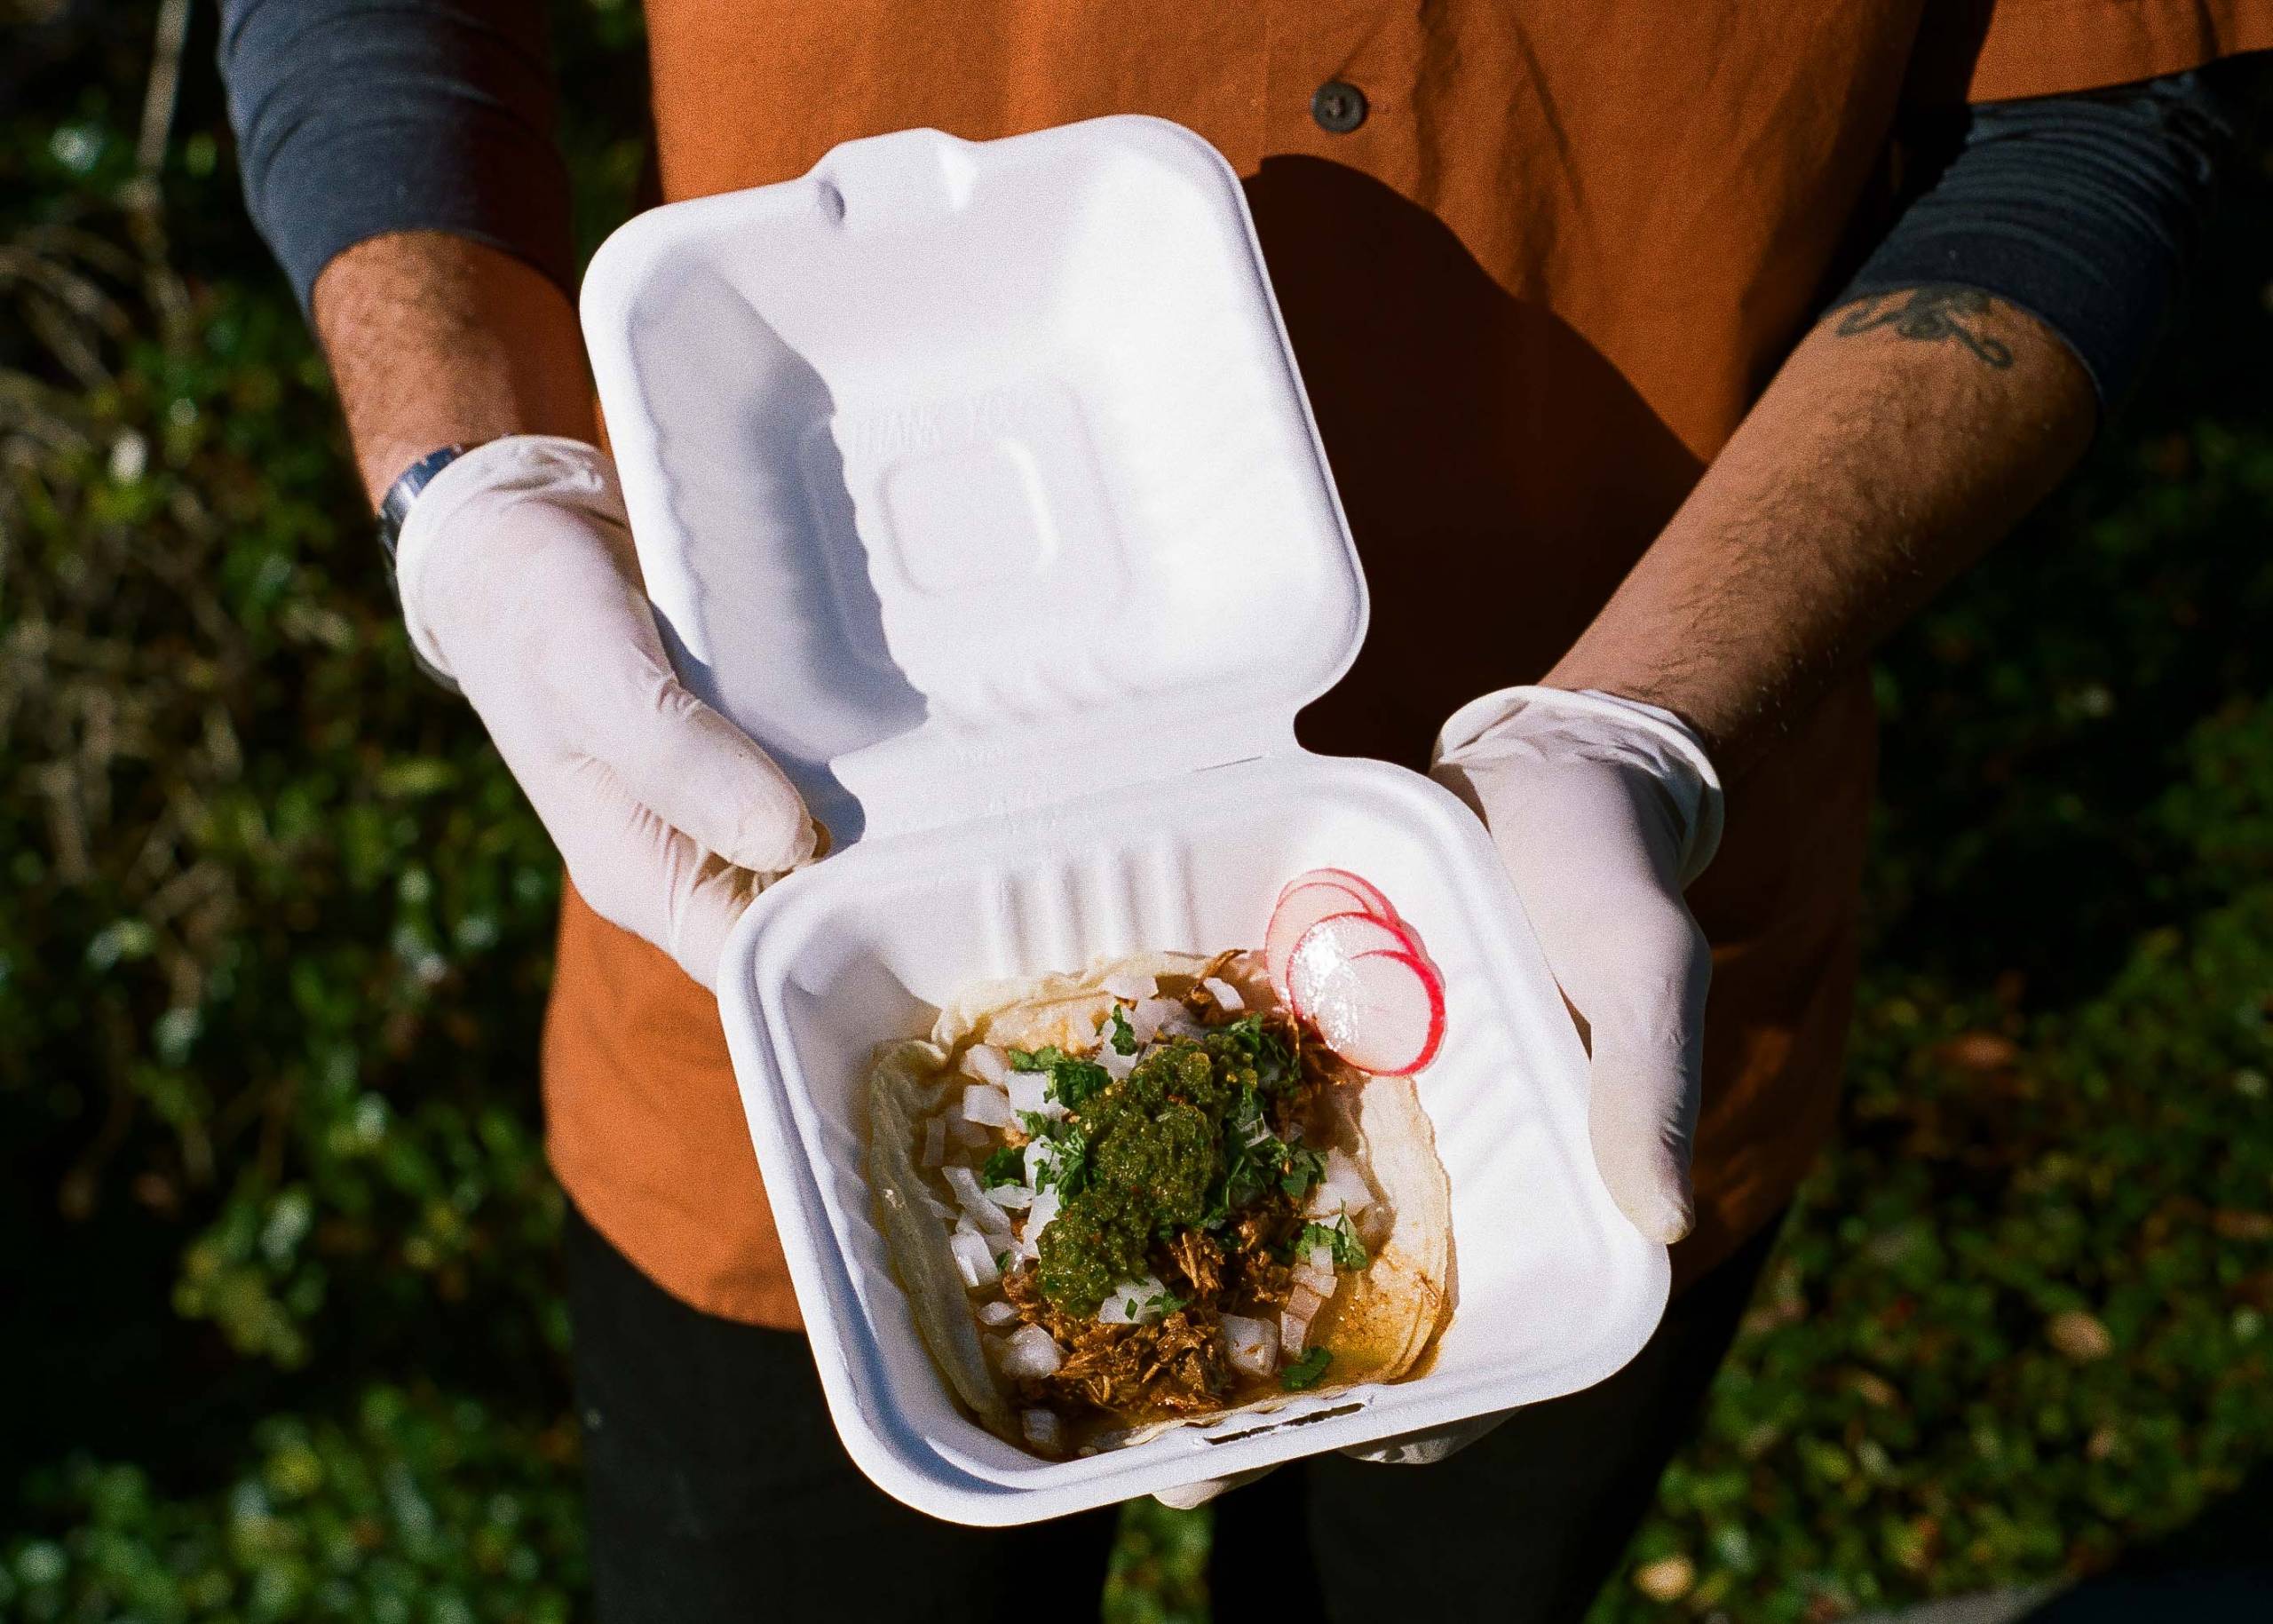 Gloved hands holding a takeout container with a single taco inside.